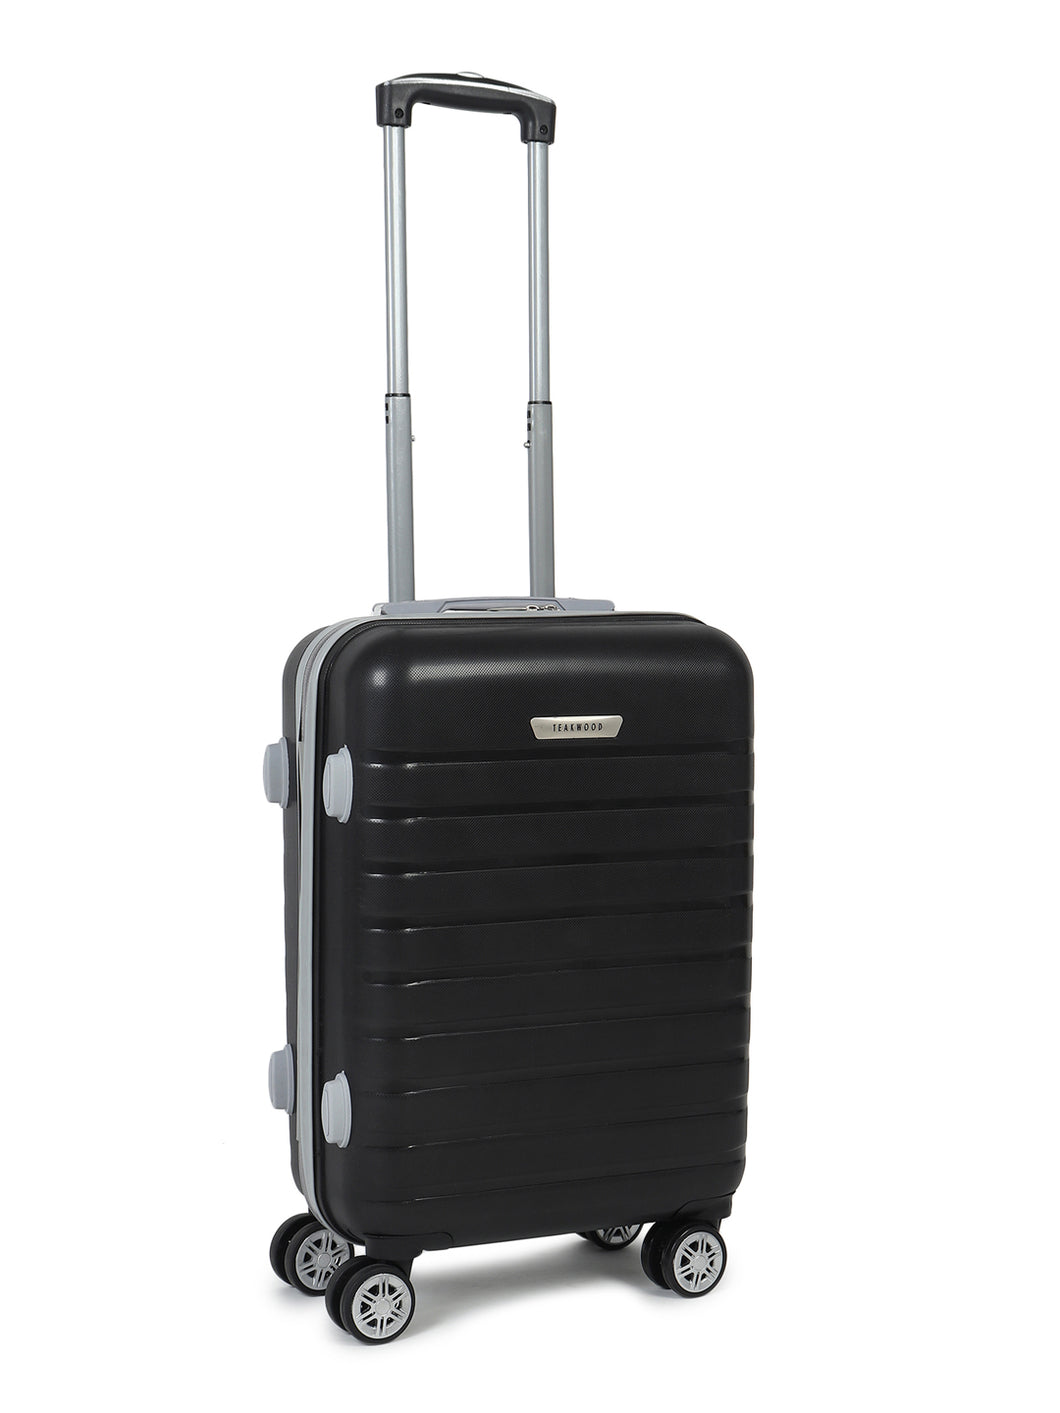 Black Textured Hard-Sided Cabin Trolley Suitcase